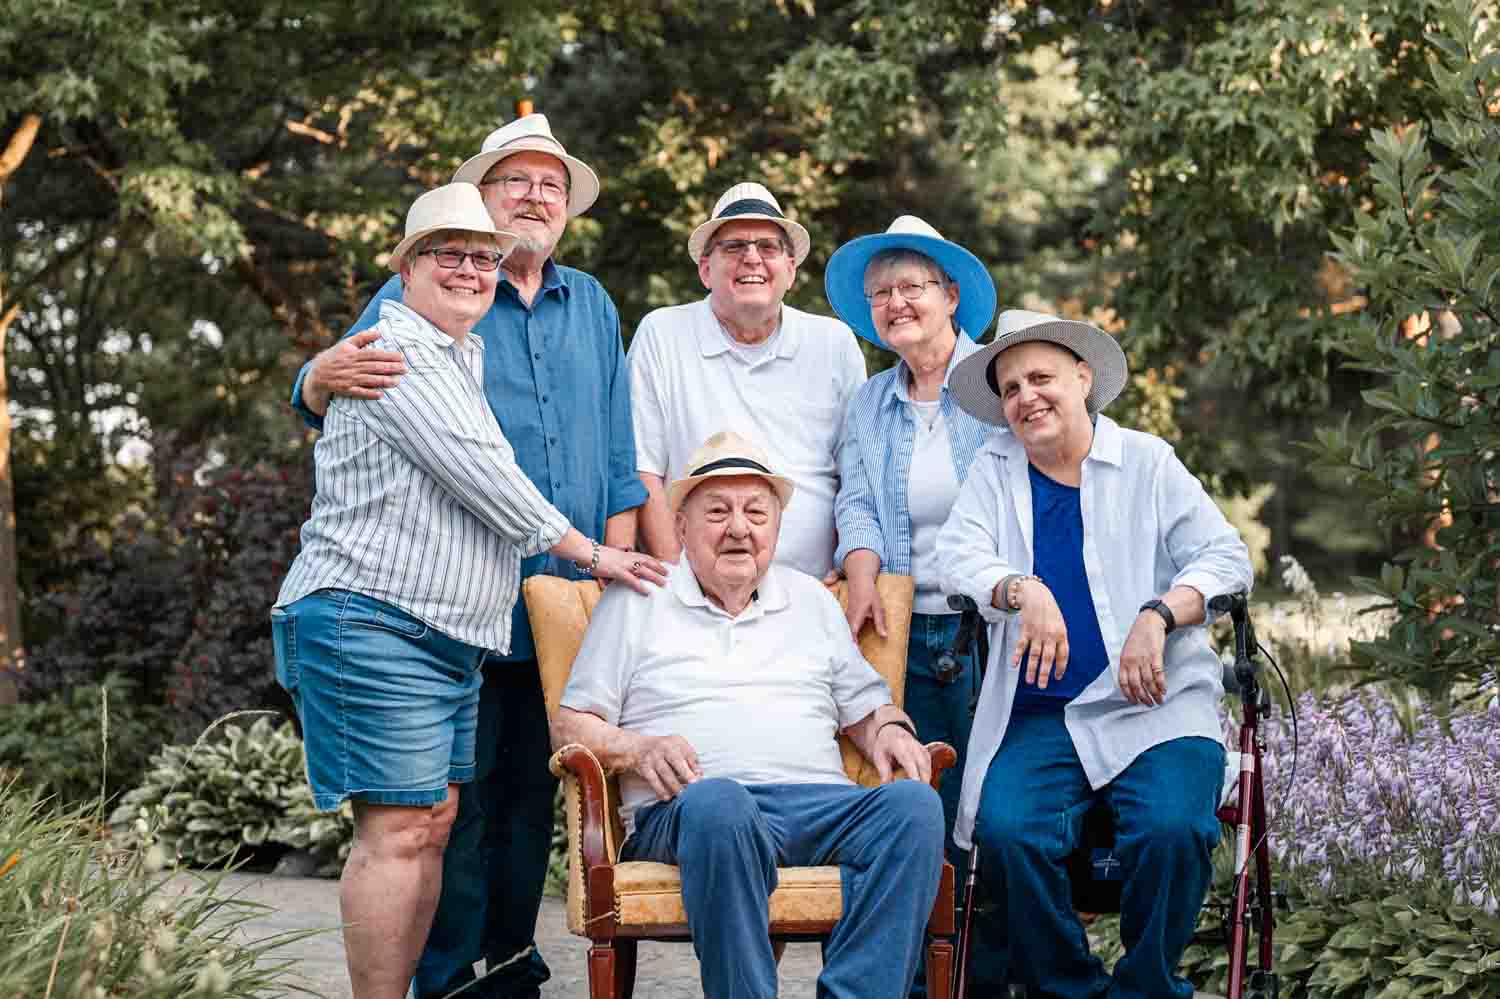 Family image of five siblings with their dad all wearing hats